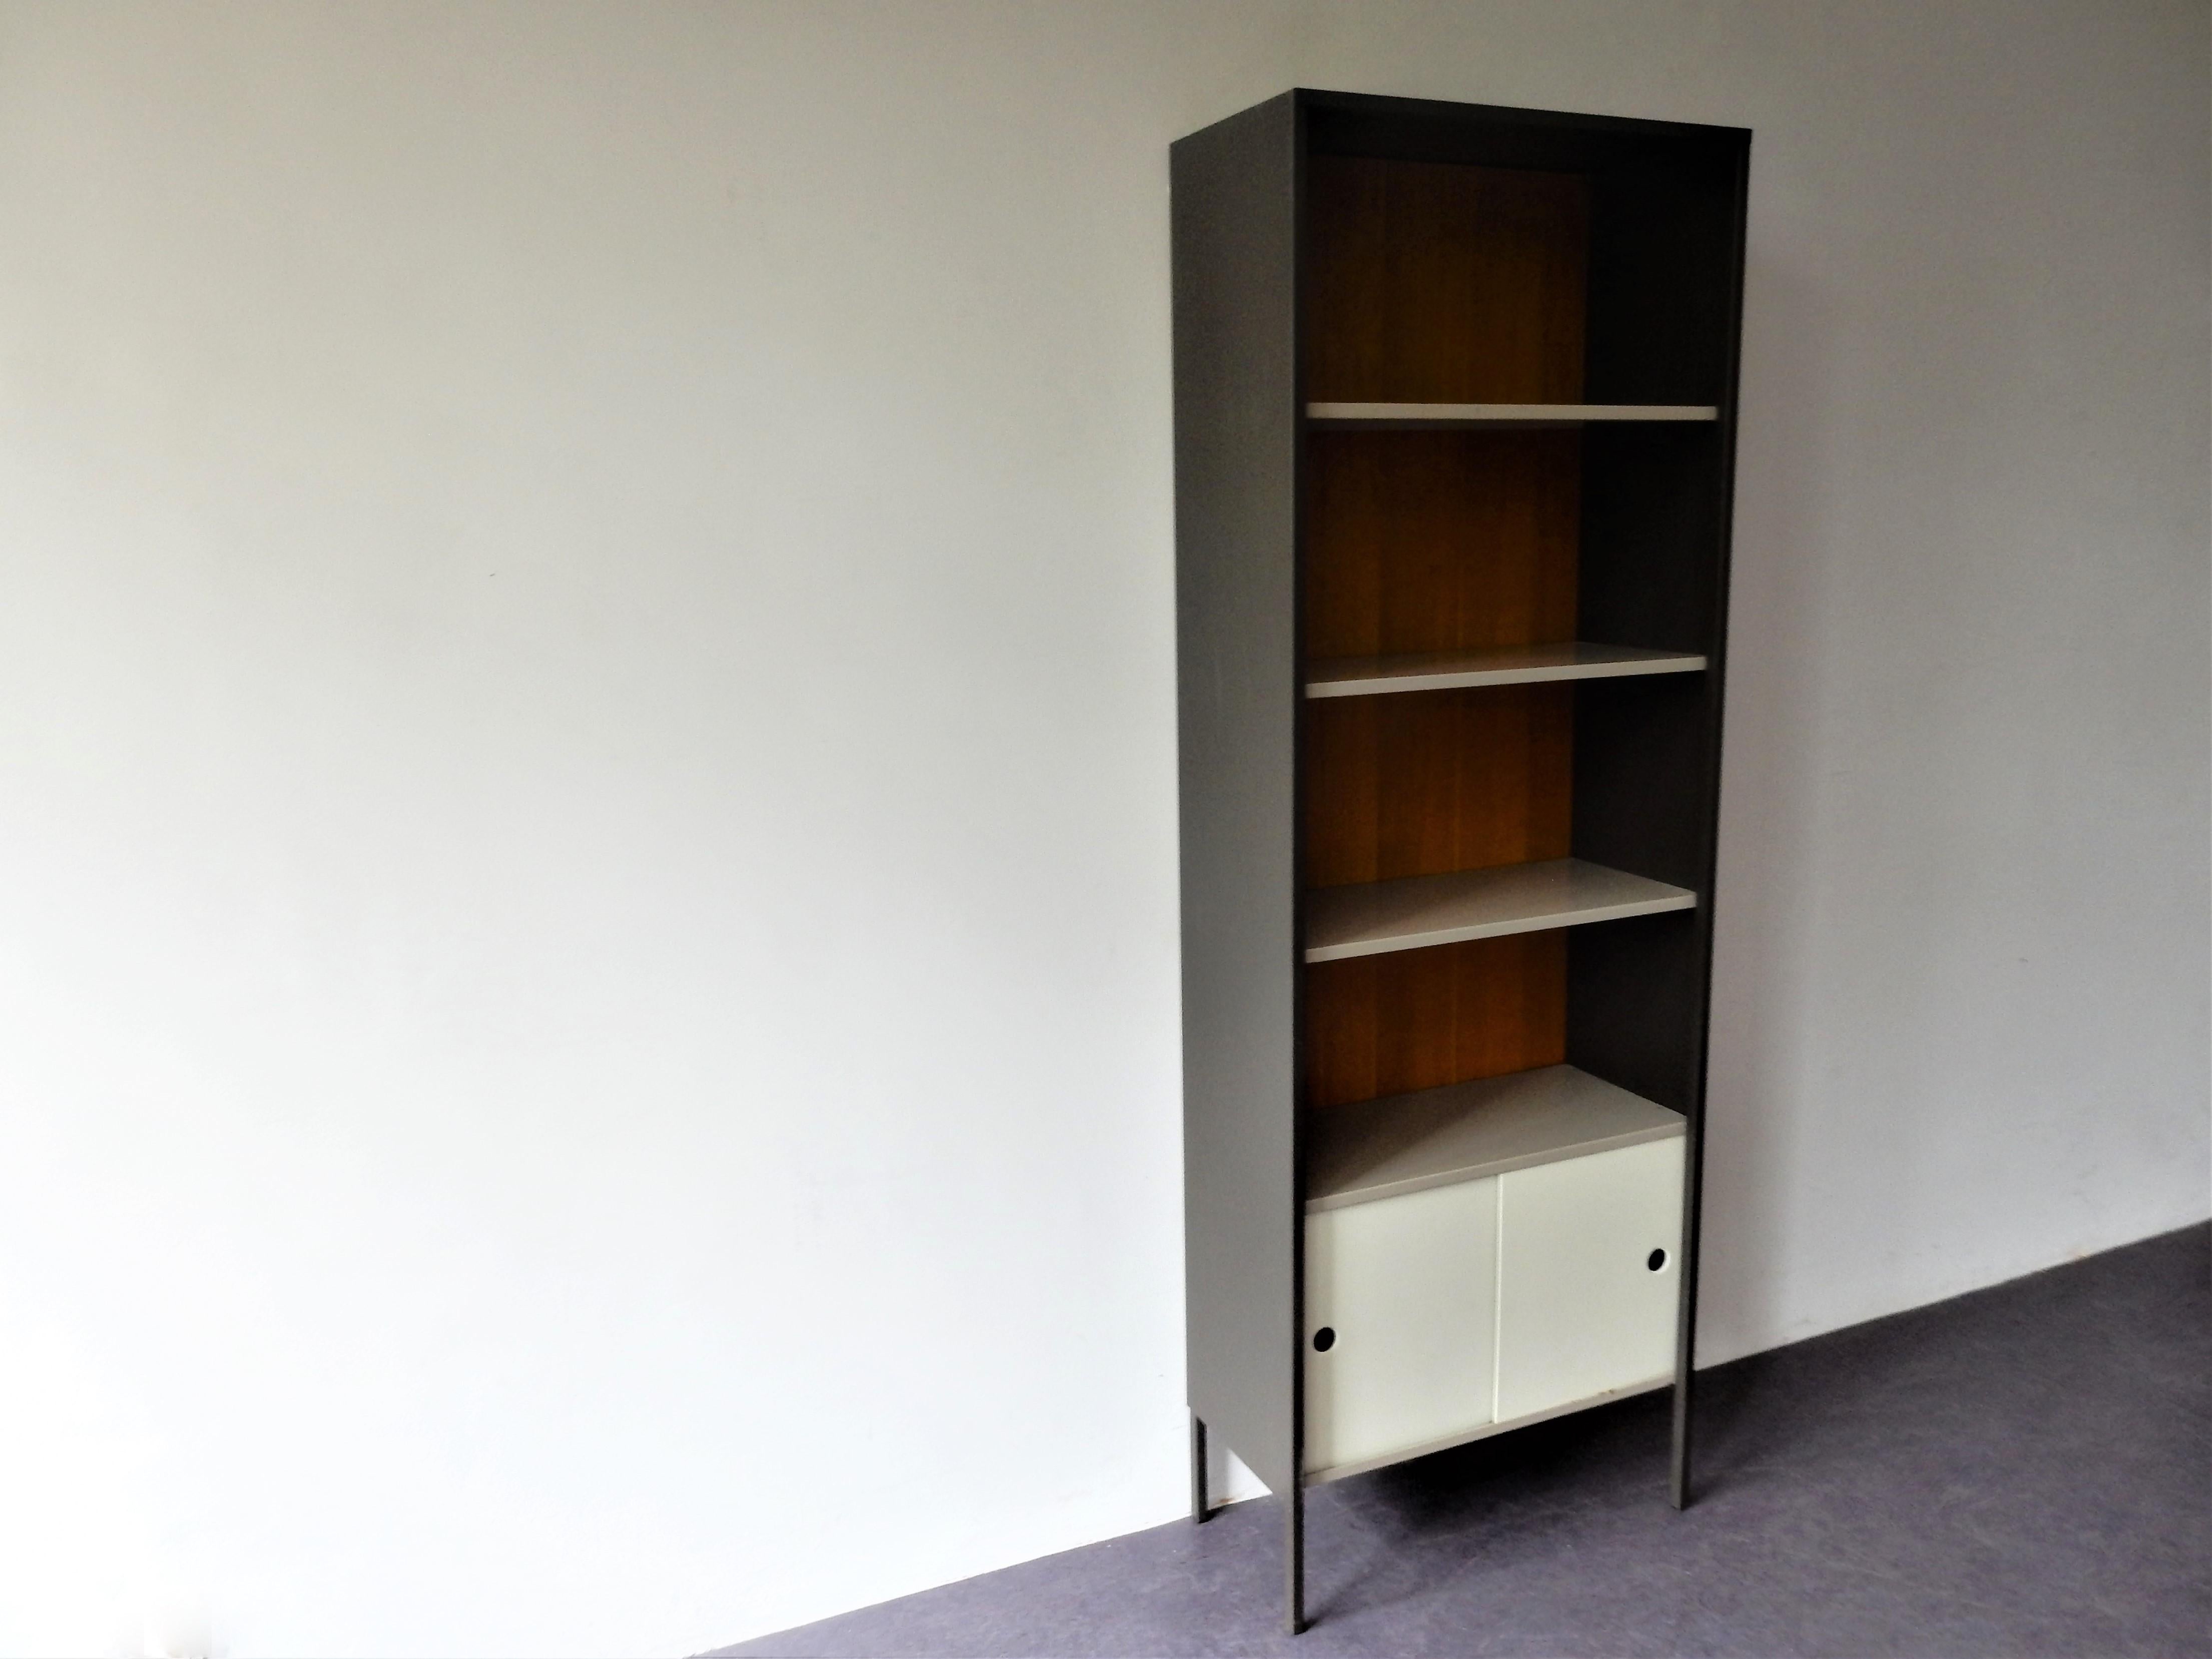 This elegant bookcase was designed by Coen de Vries for Pilastro in the 1960's. It has a dark grey metal frame with a nice wooden backpanel. It comes with 3 grey metal shelves and at the bottom a metal cabinet with 2 white sliding doors. We have